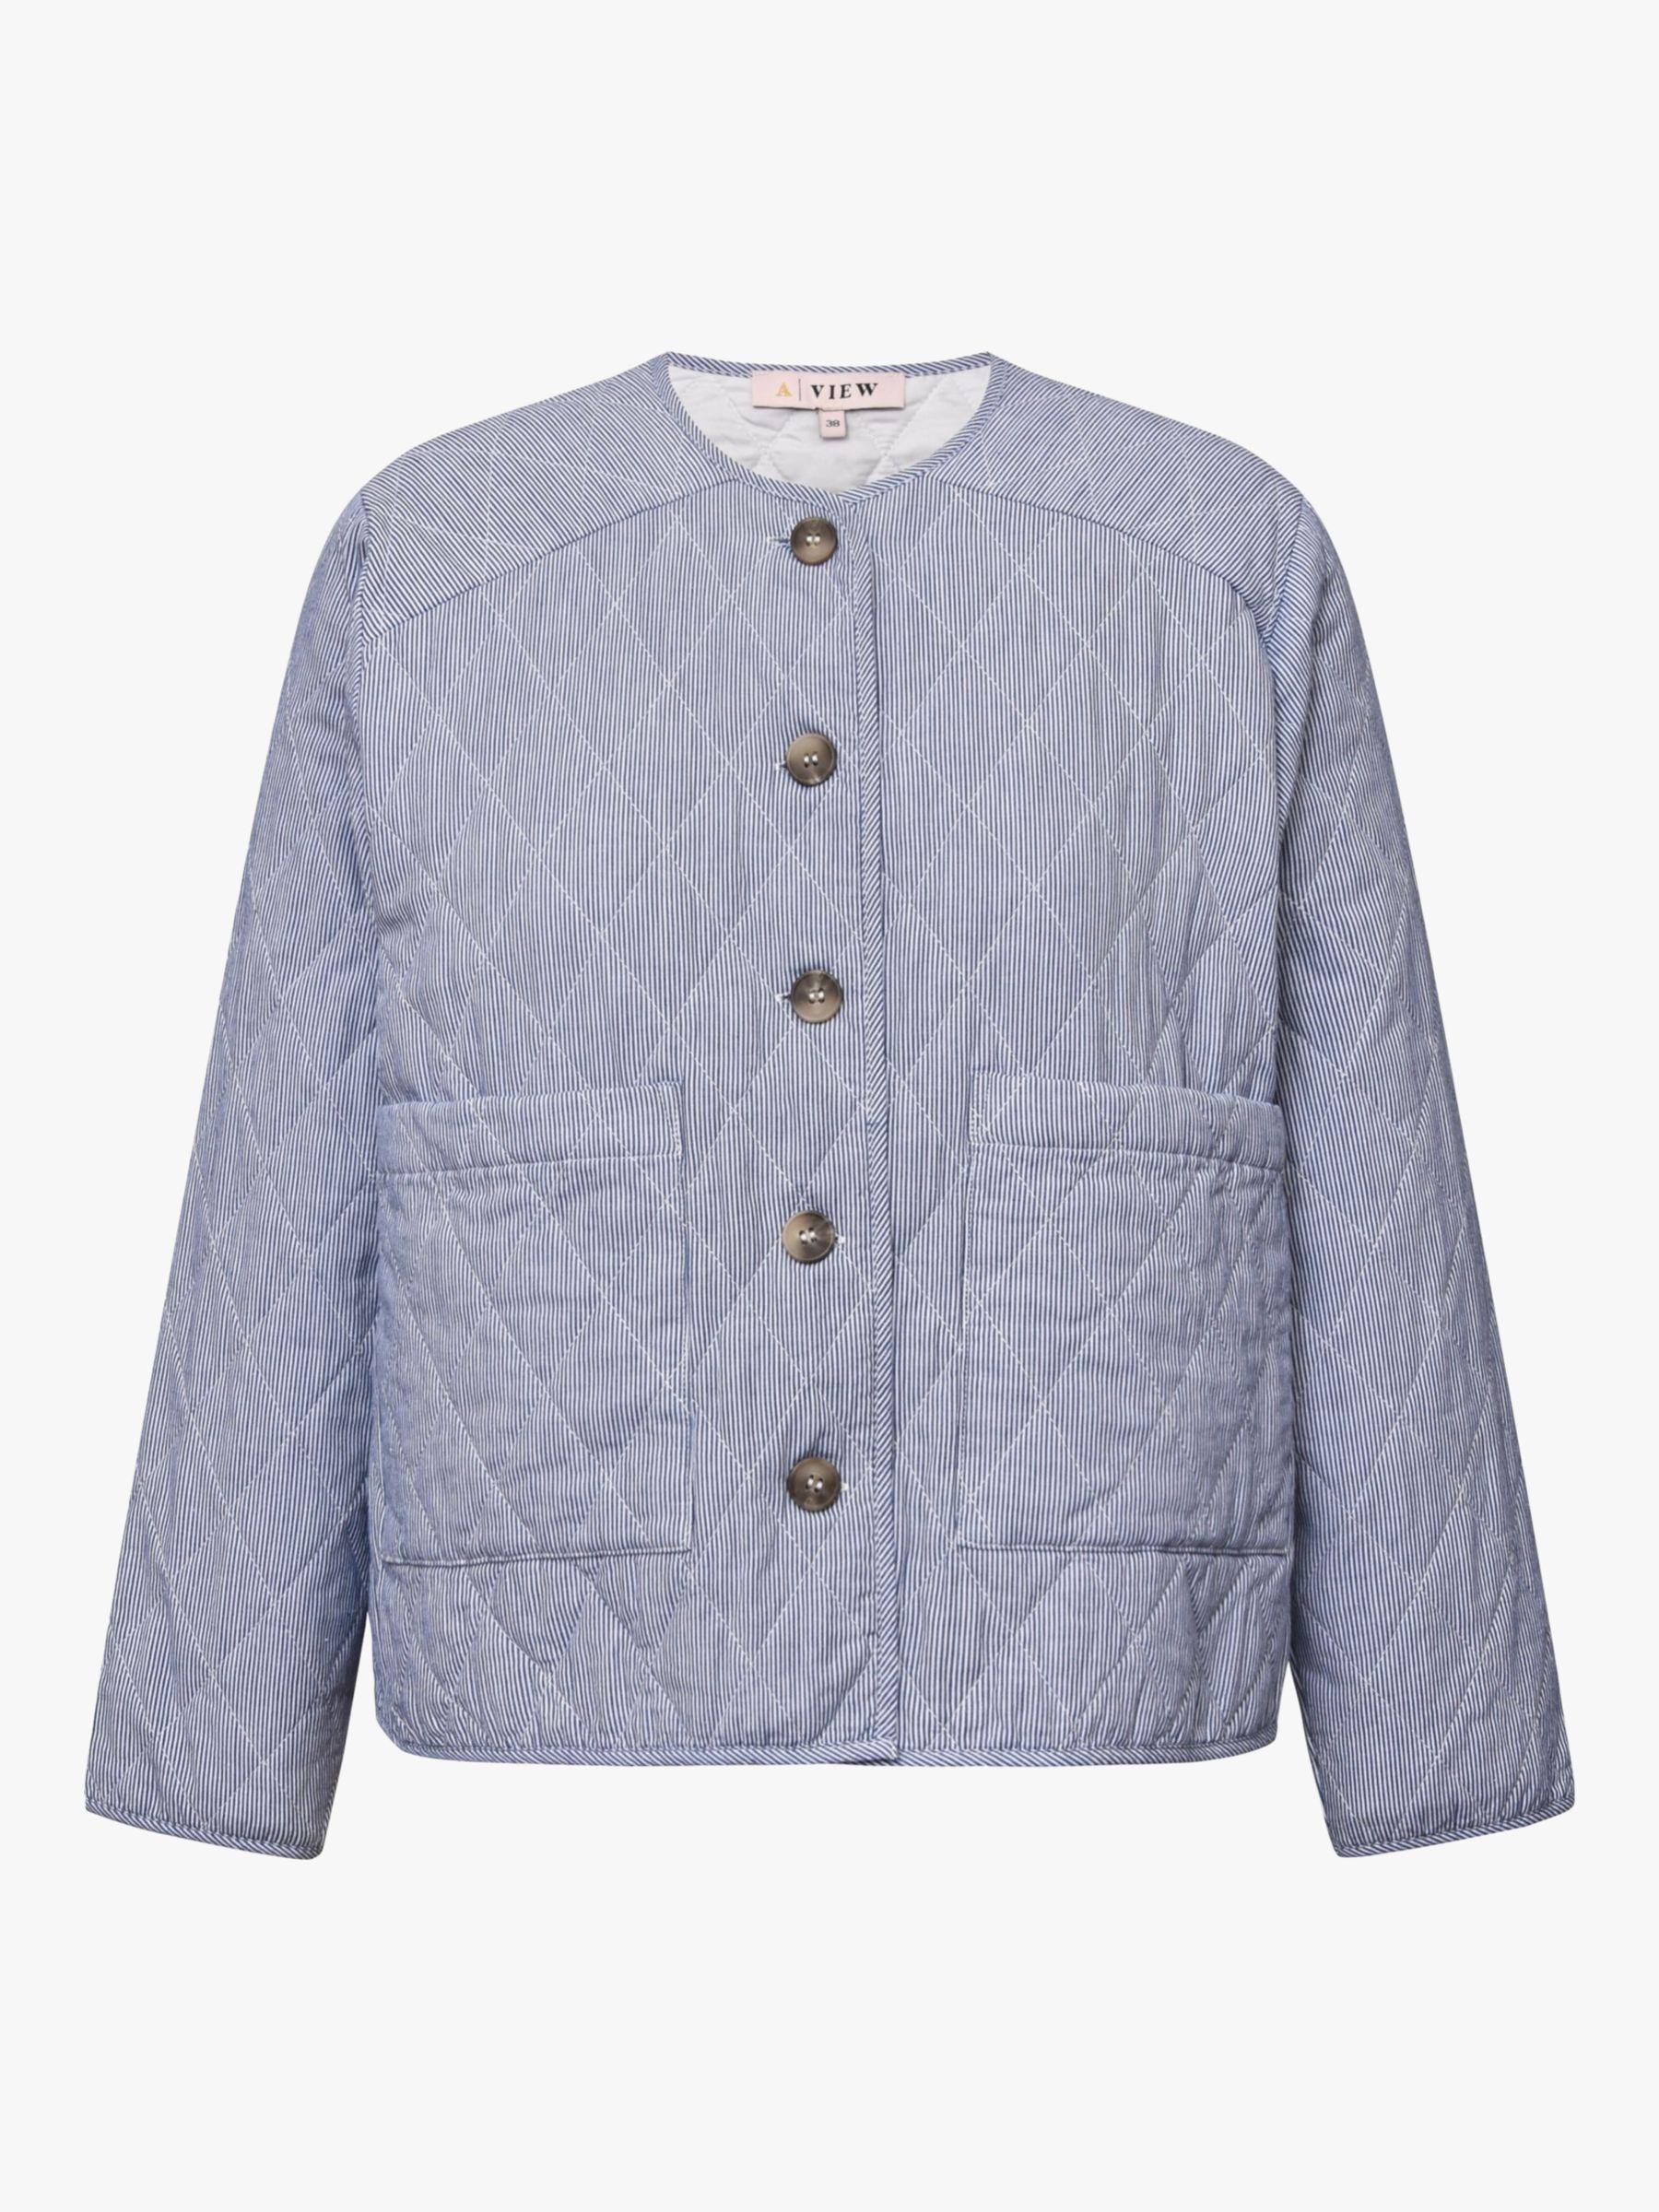 Buy A-VIEW Kammy Quilted Jacket, 699 Navy Online at johnlewis.com